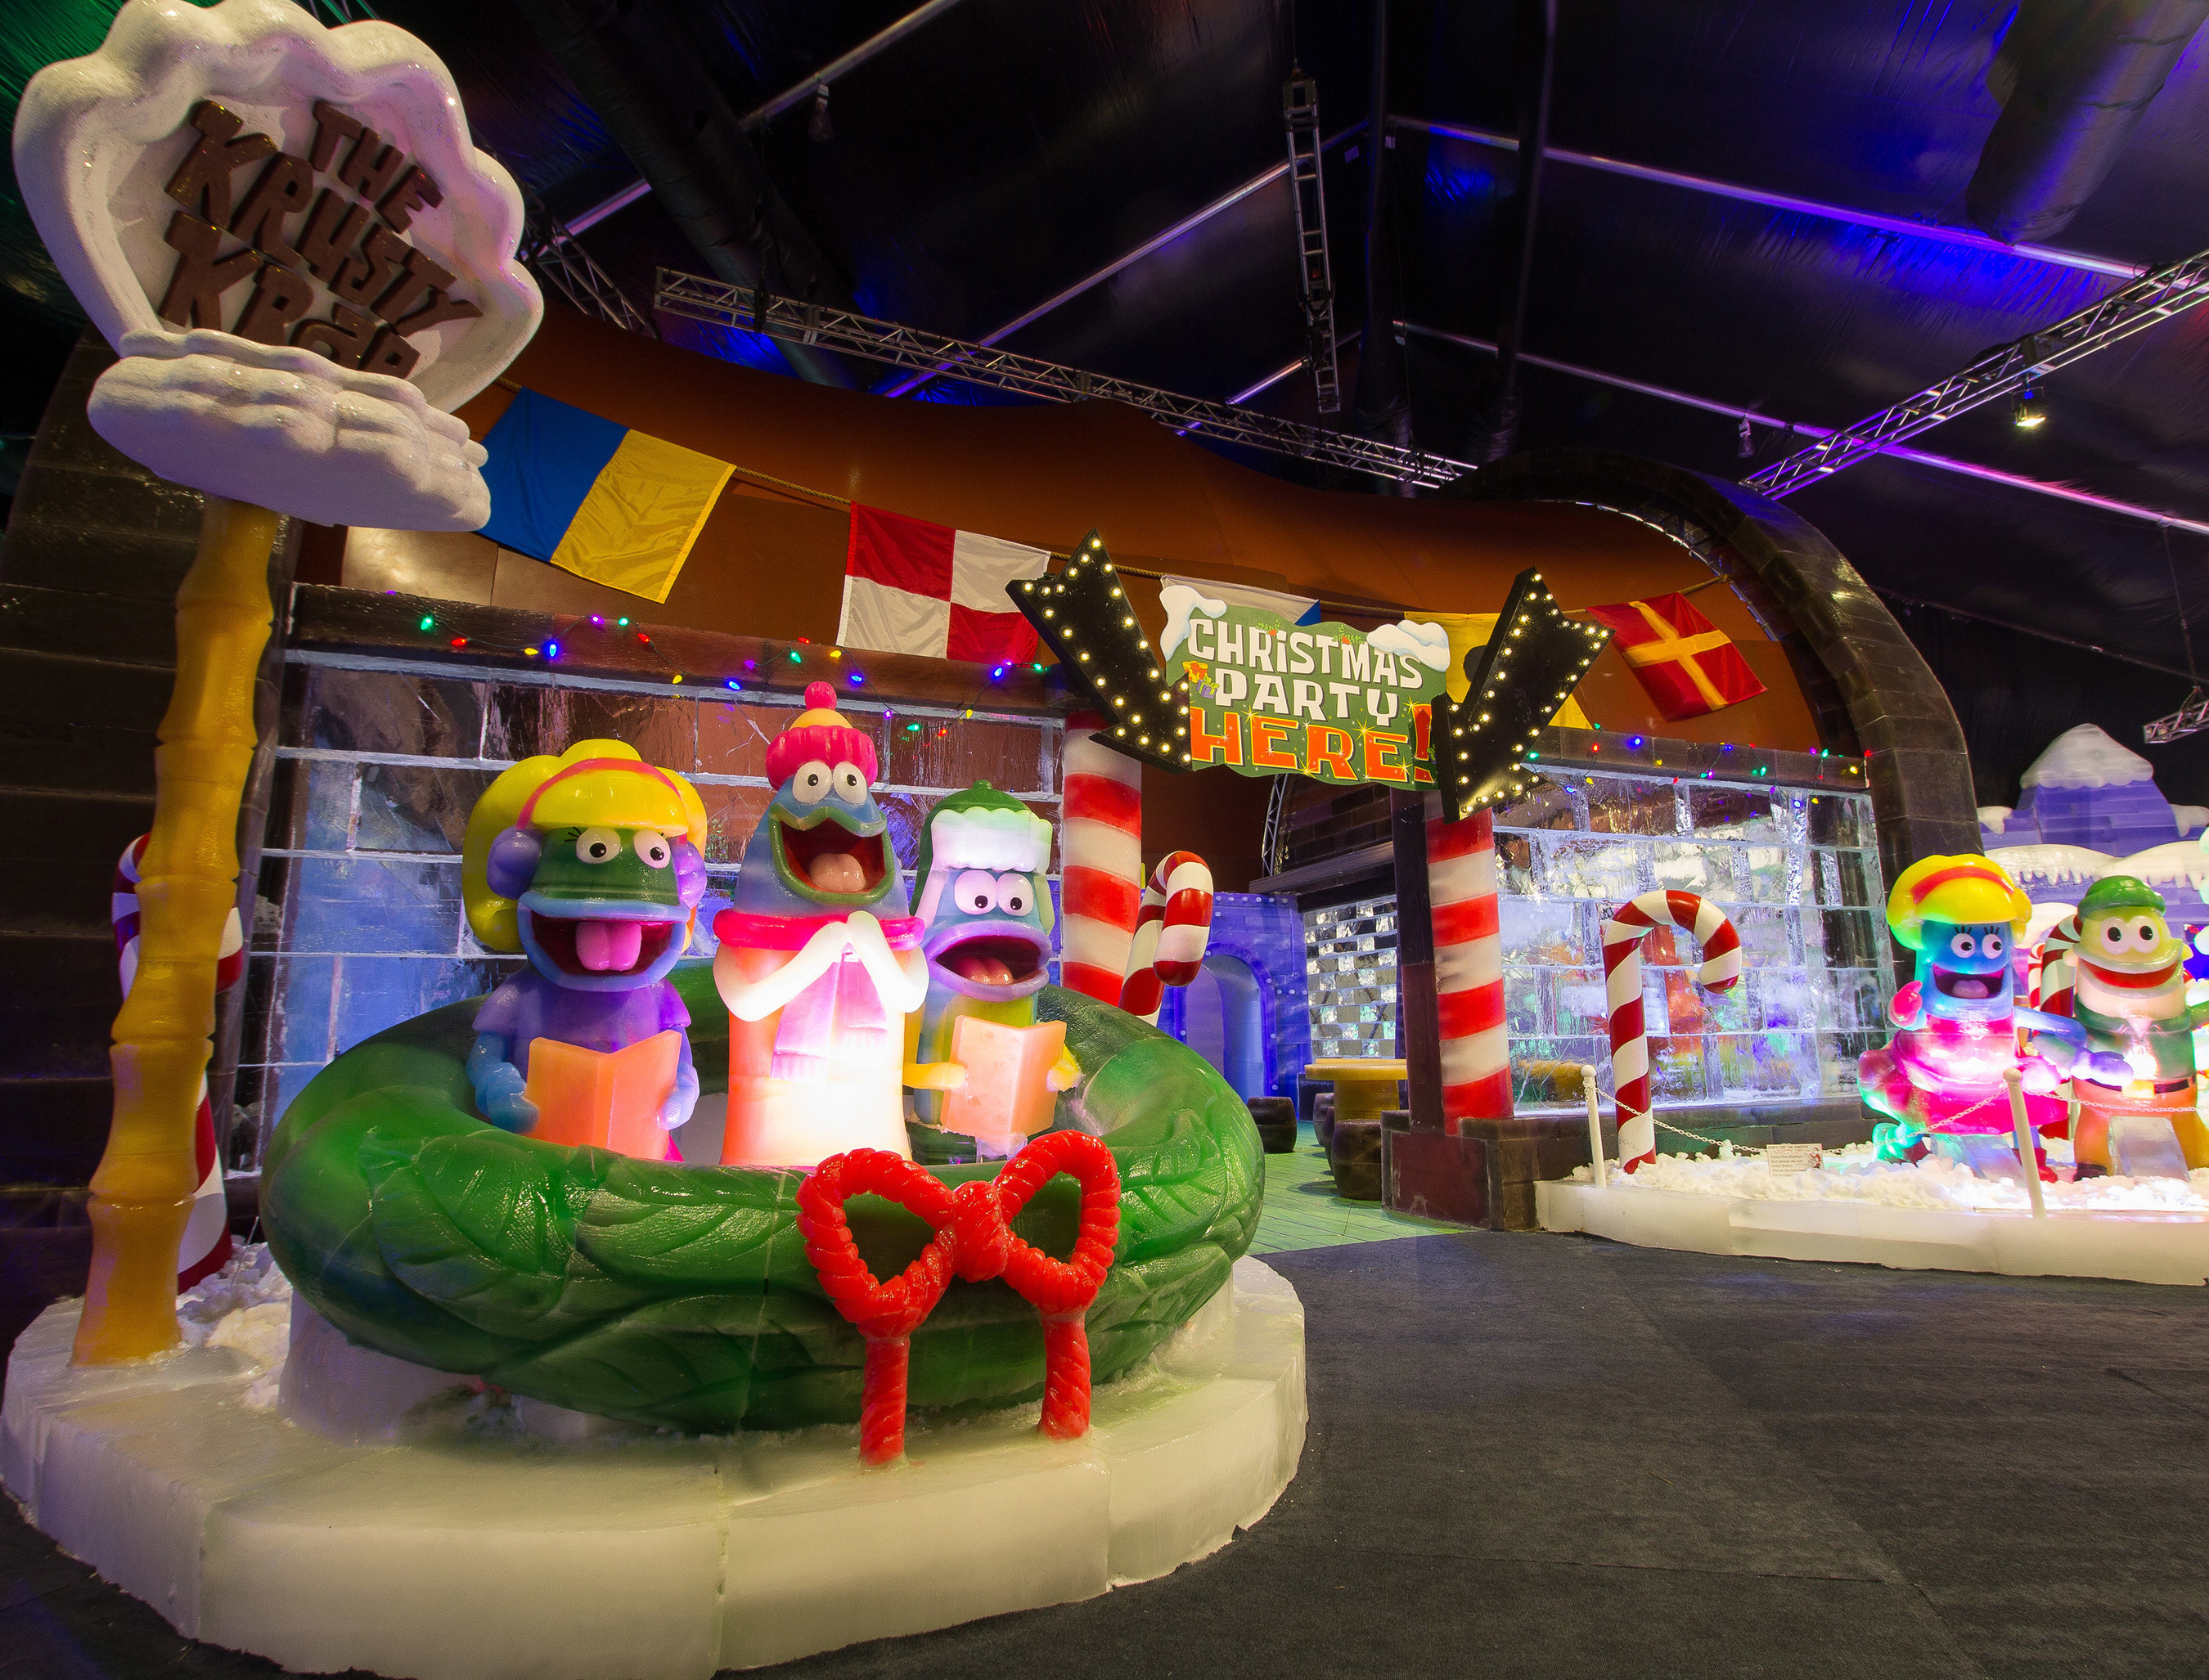 For the first time in the US, guests are able to enter the Krusty Krab made of ice at Moody Gardens ICE LAND: Ice Sculptures with SpongeBob SquarePants that opened Saturday in Galveston, TX